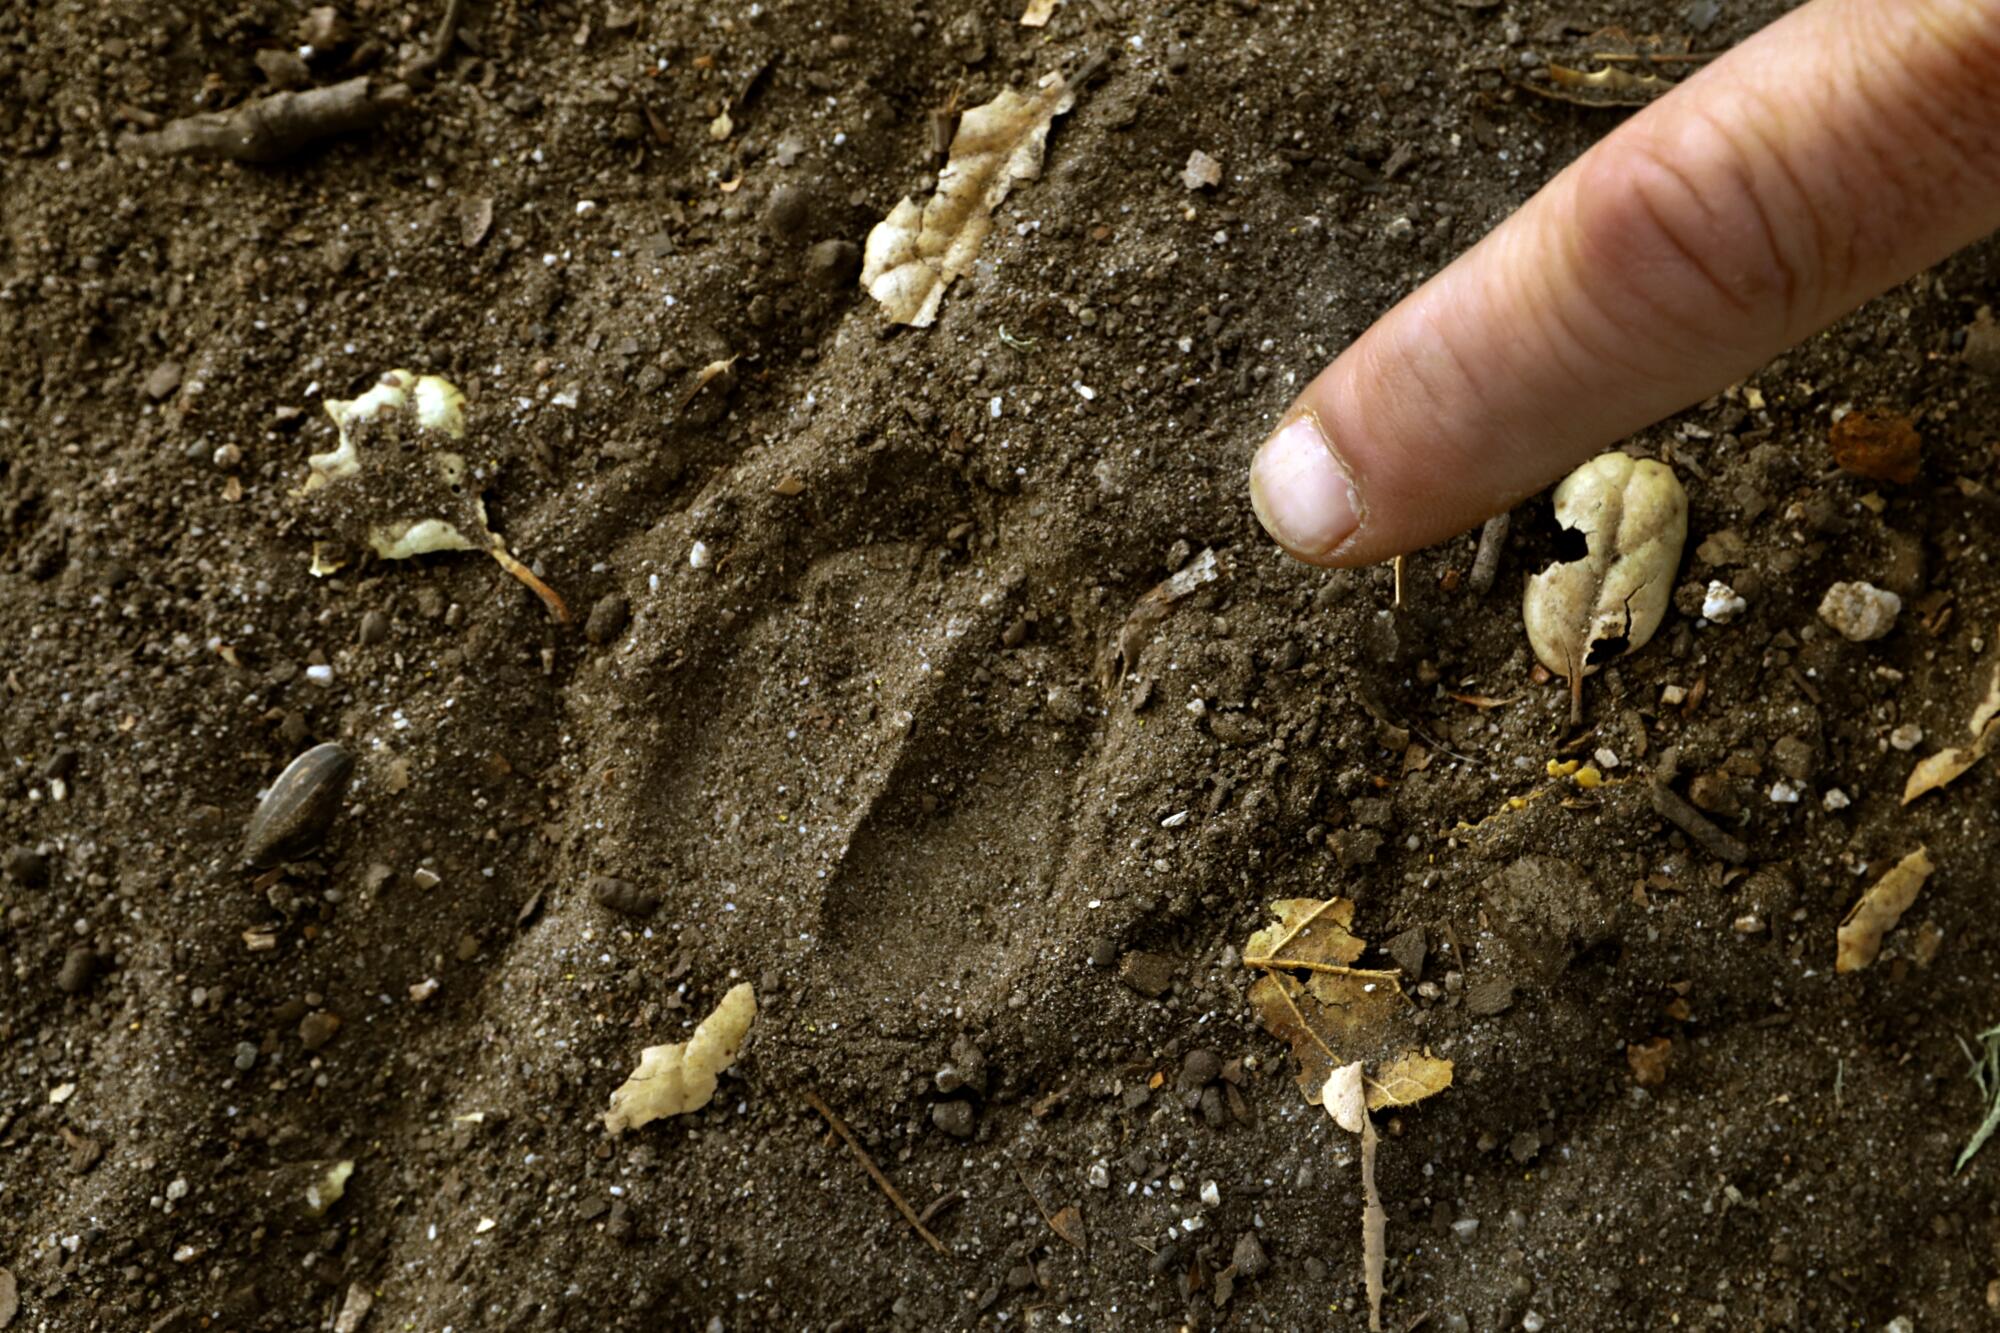 Wild pig tracks are visible in dirt